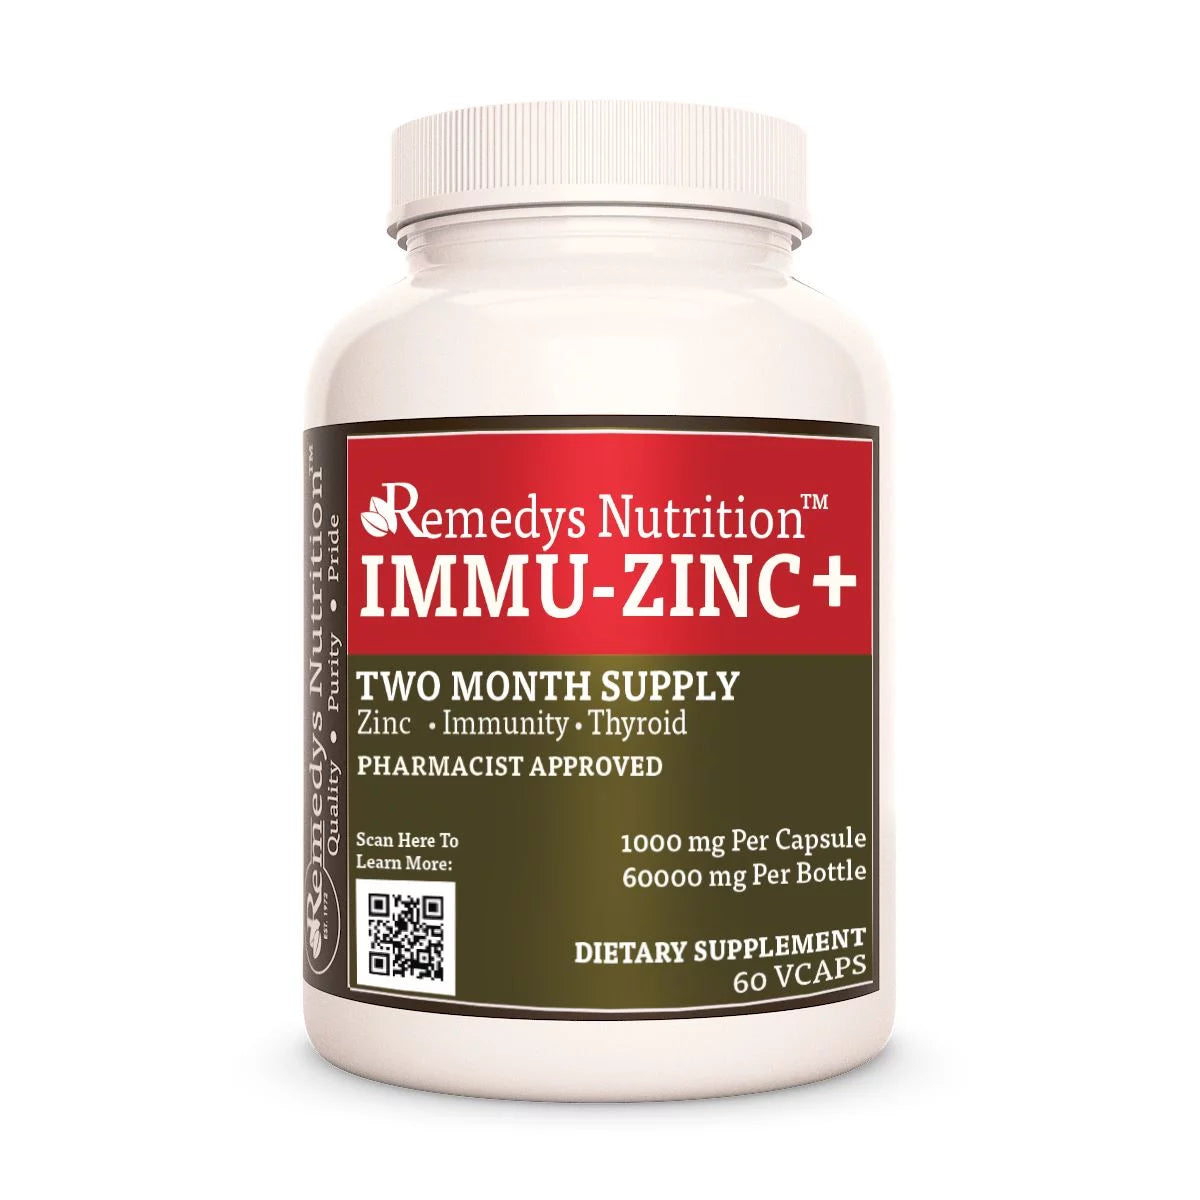 Image of Remedy's Nutrition® Immu-Zinc+™ Capsules Herbal Supplement front bottle. Made in the USA. Immunity. Elderberry. 